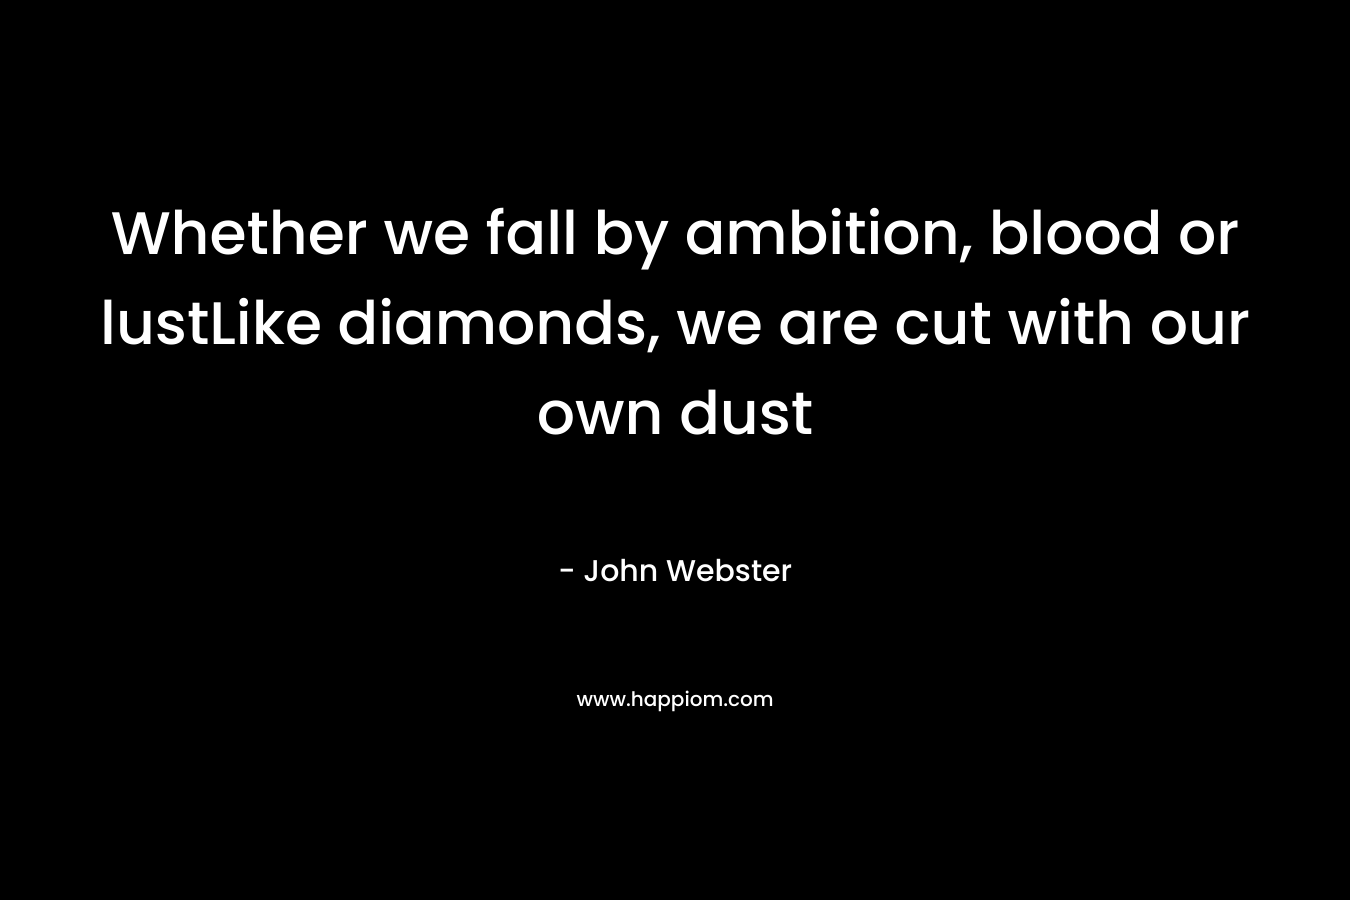 Whether we fall by ambition, blood or lustLike diamonds, we are cut with our own dust – John Webster